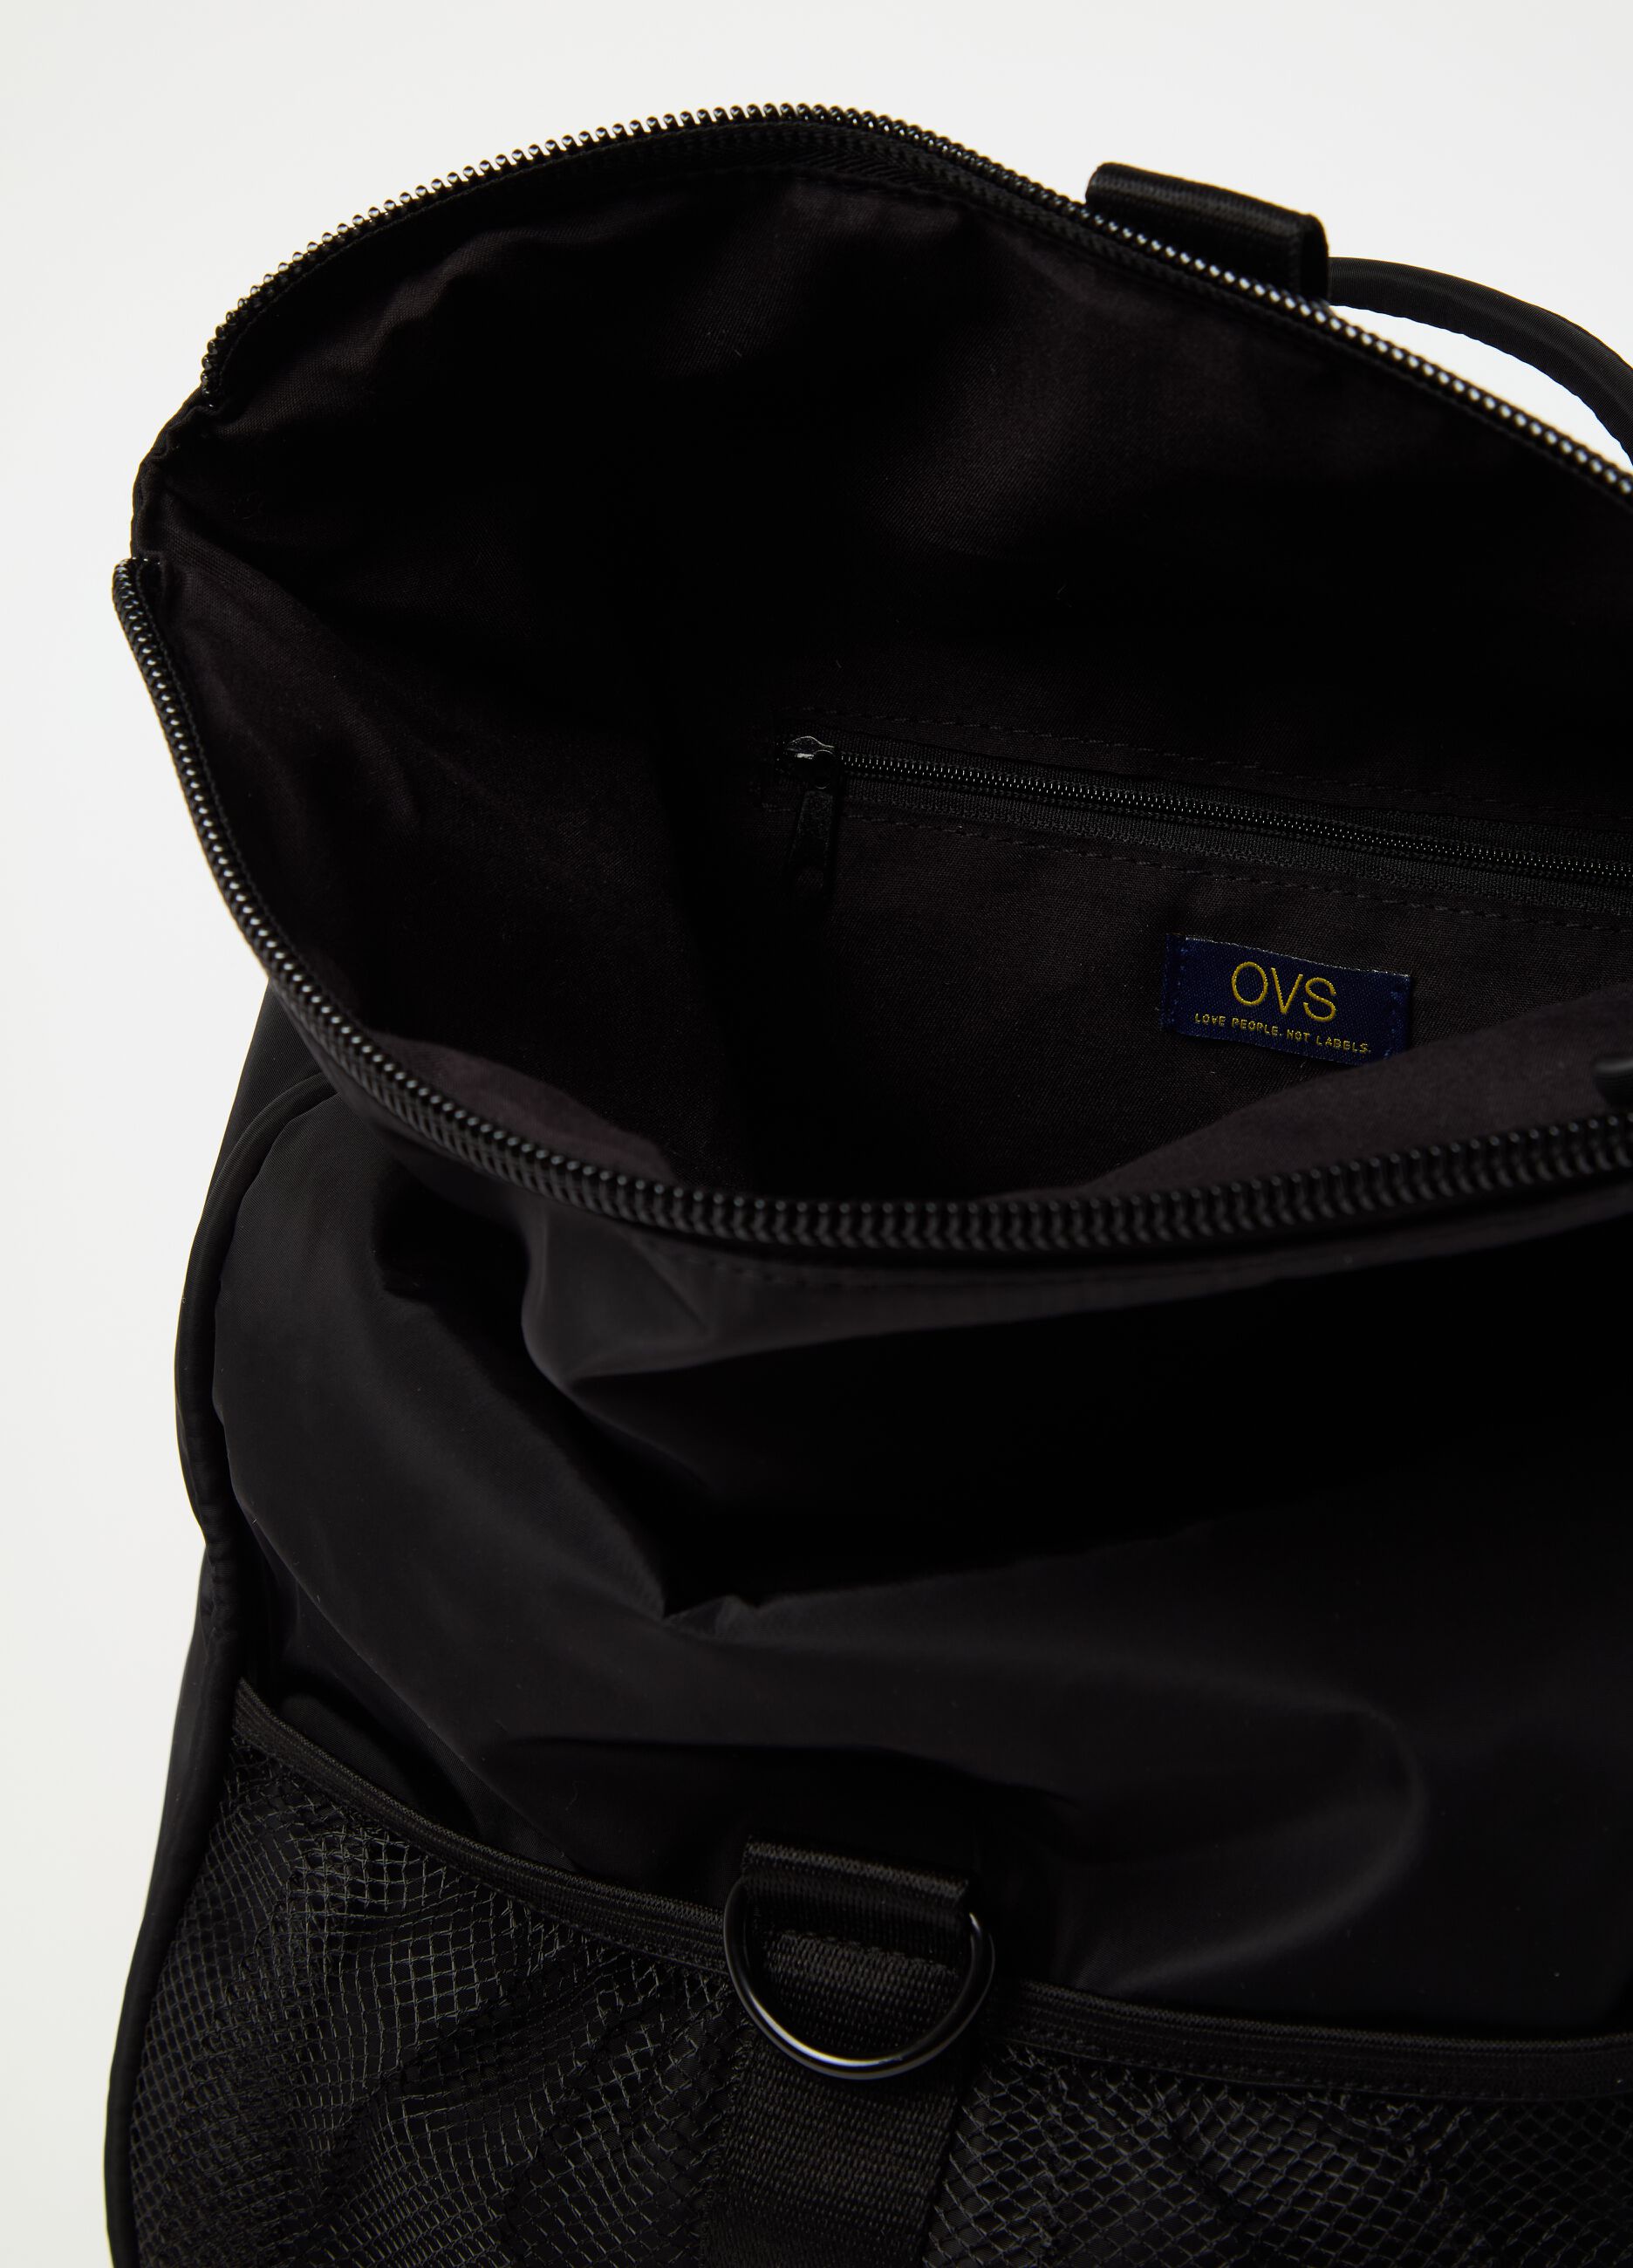 Briefcase backpack with clasp